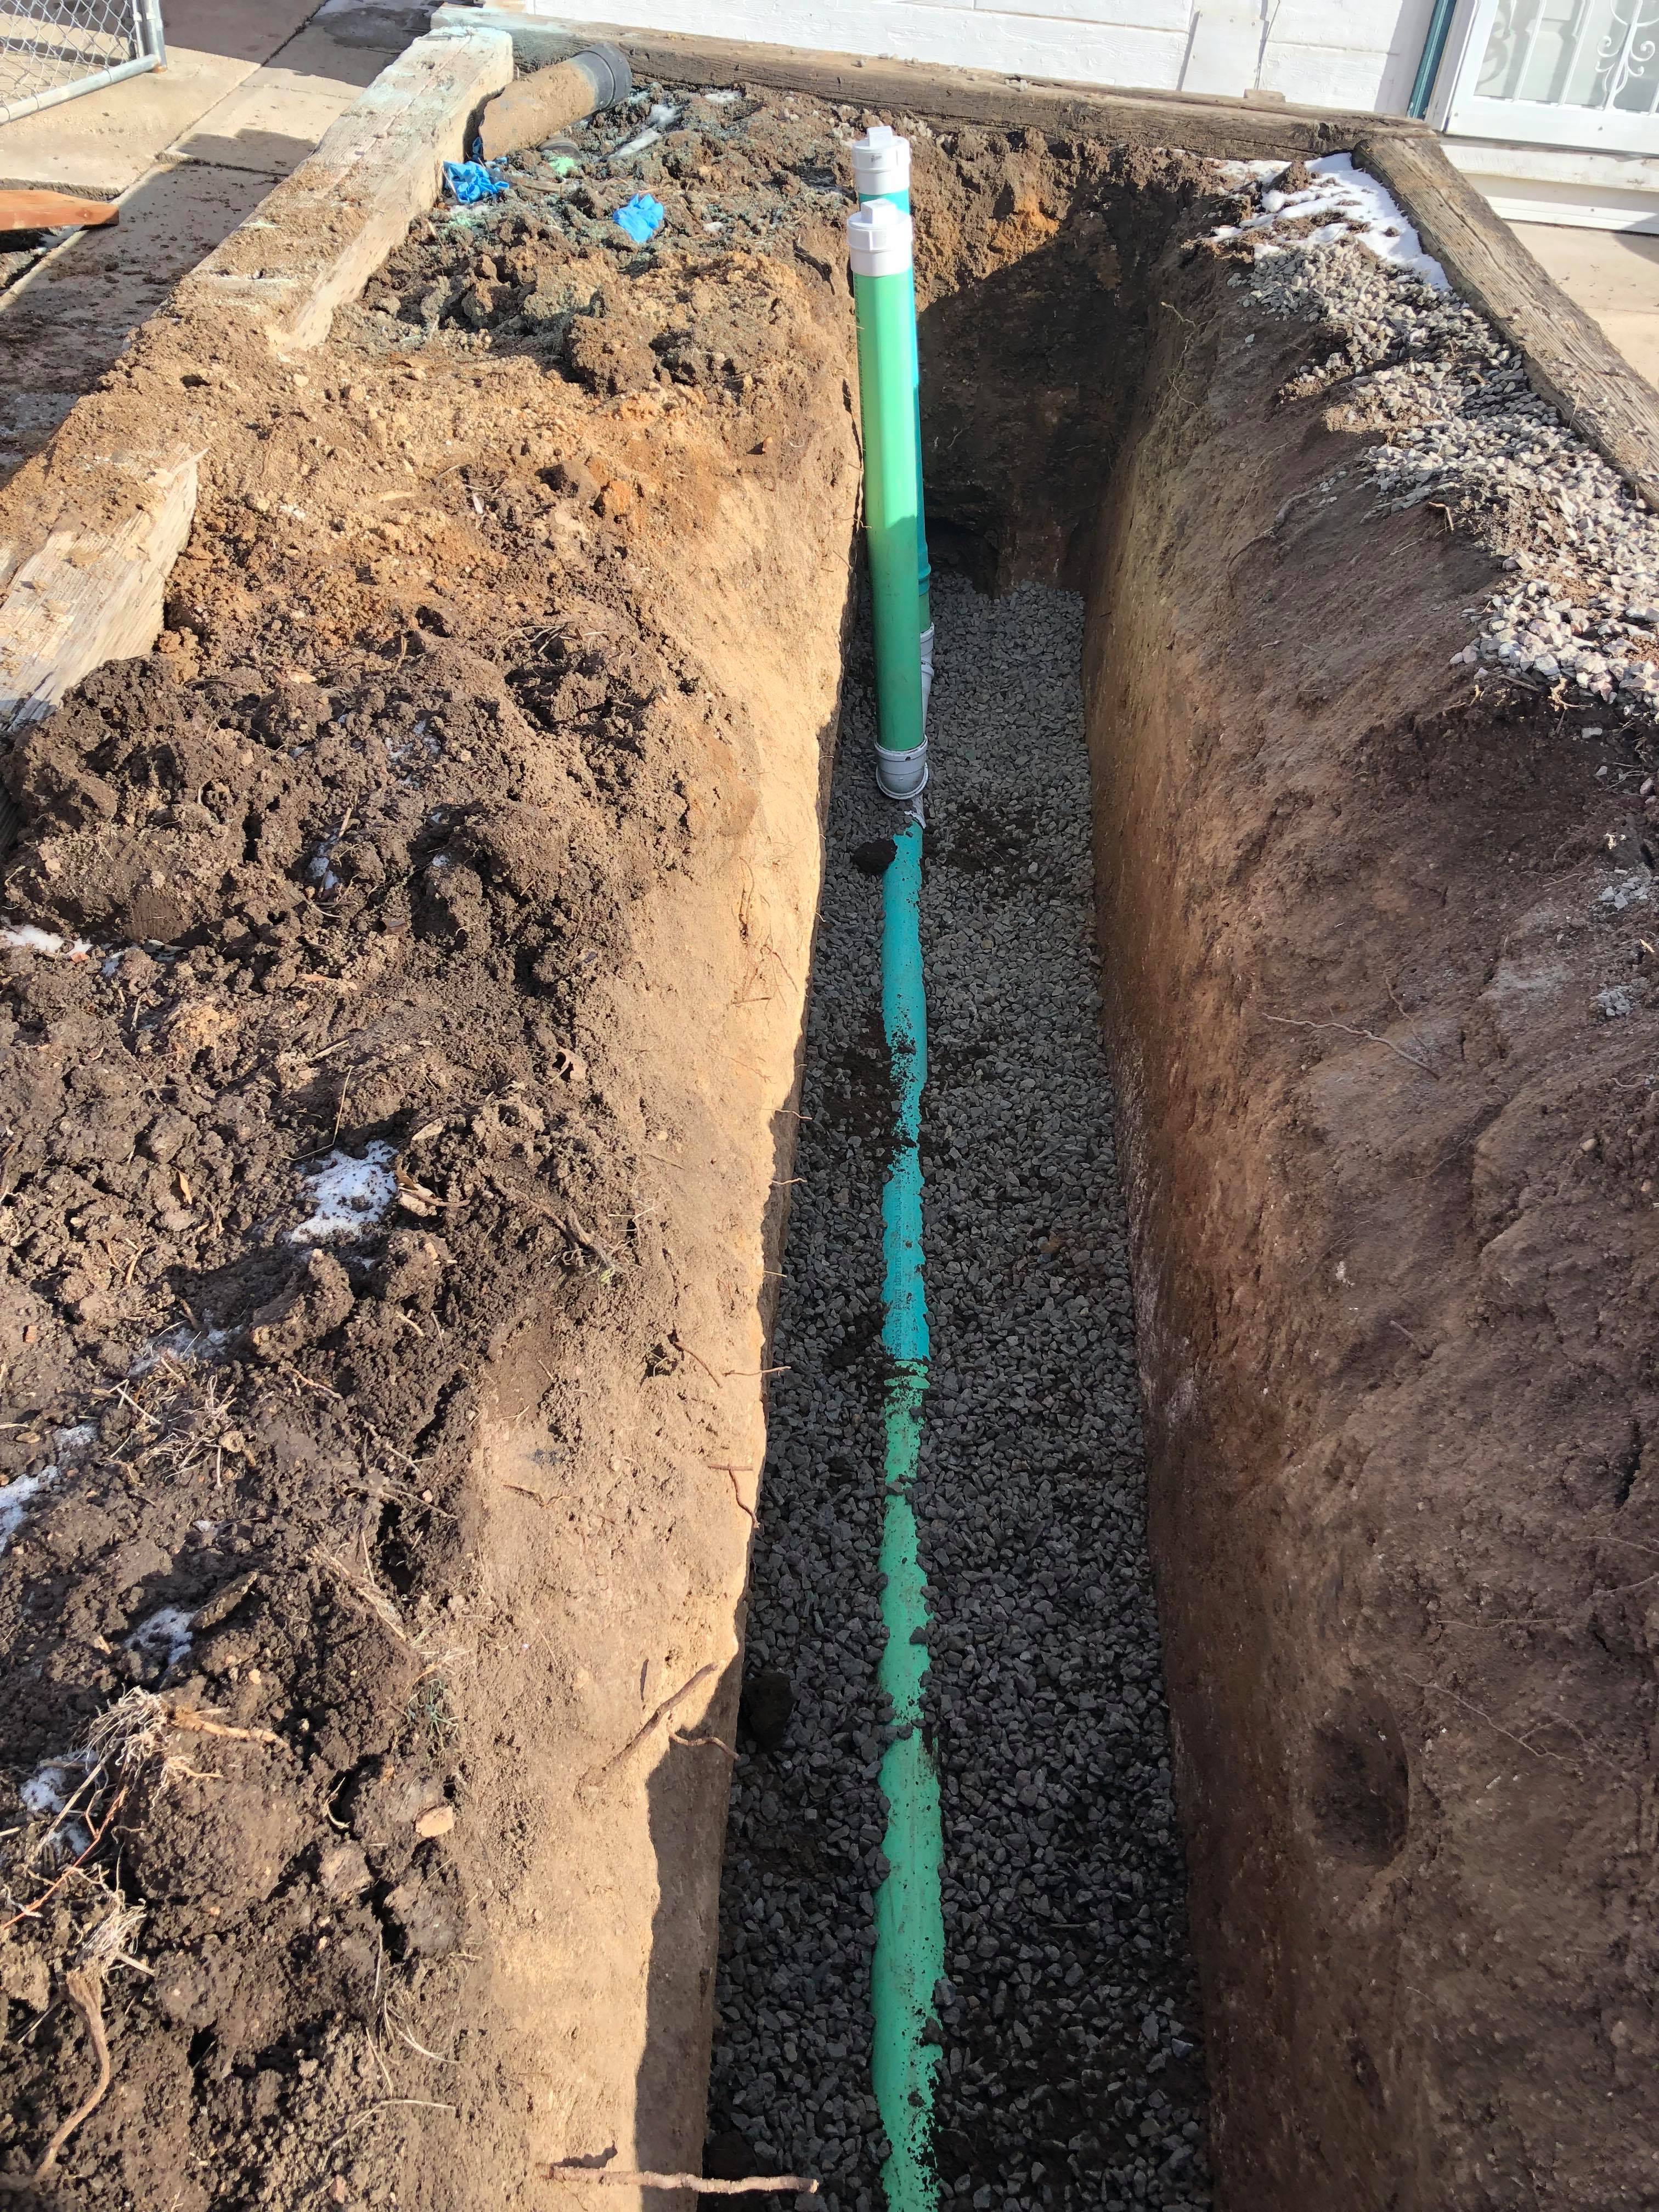 A new outdoor sewer line replacement.